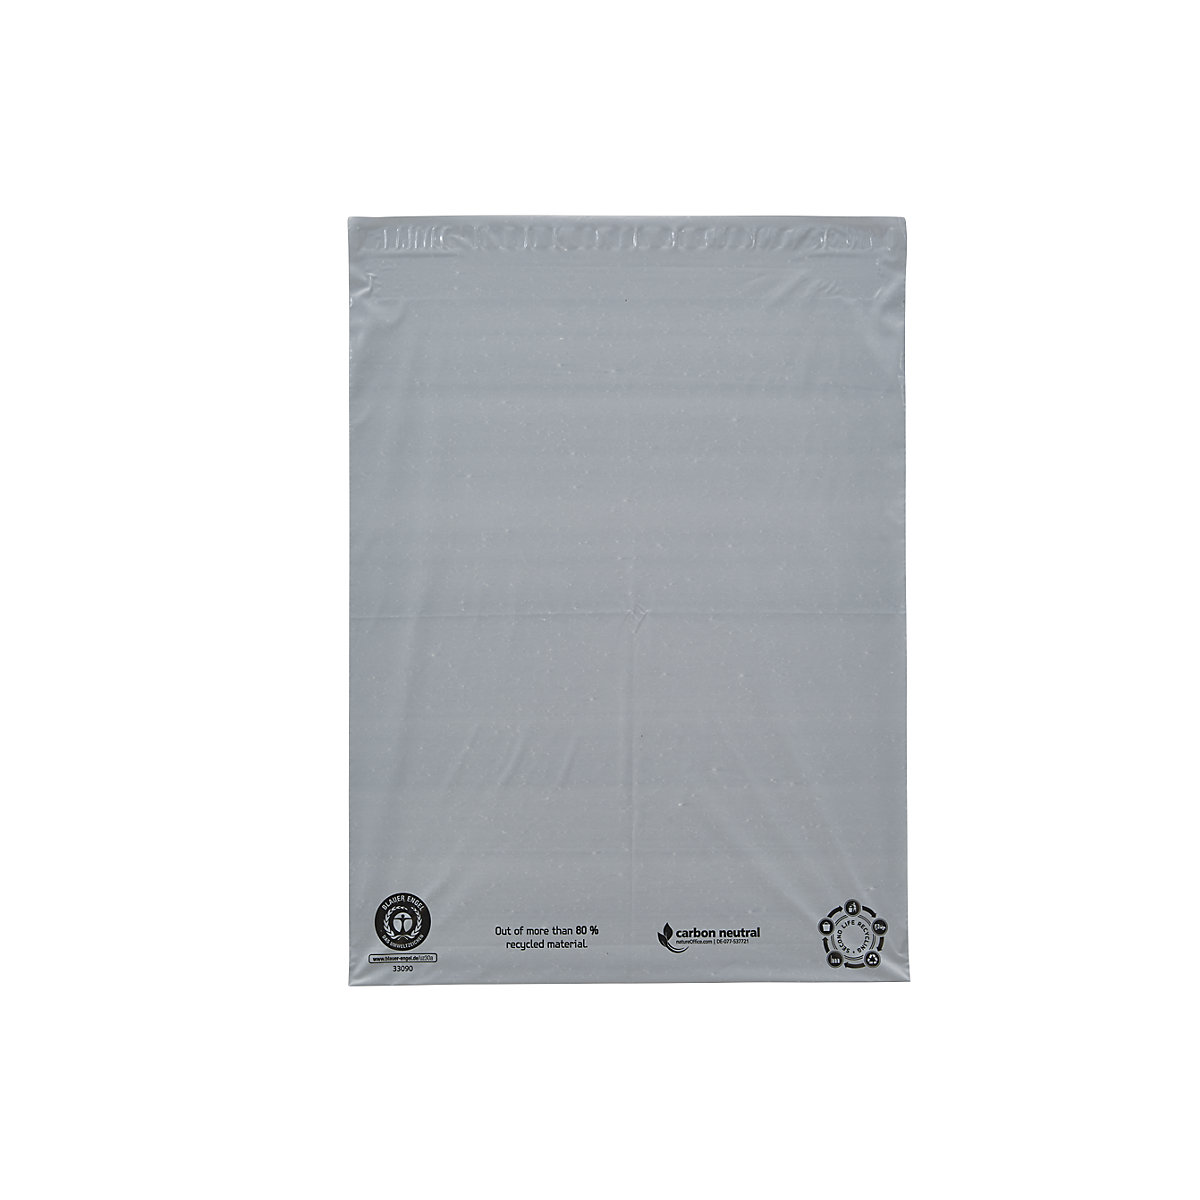 Dispatch bag, non-transparent, film thickness 60 µm, LxW 400 x 330 mm, pack of 500-1